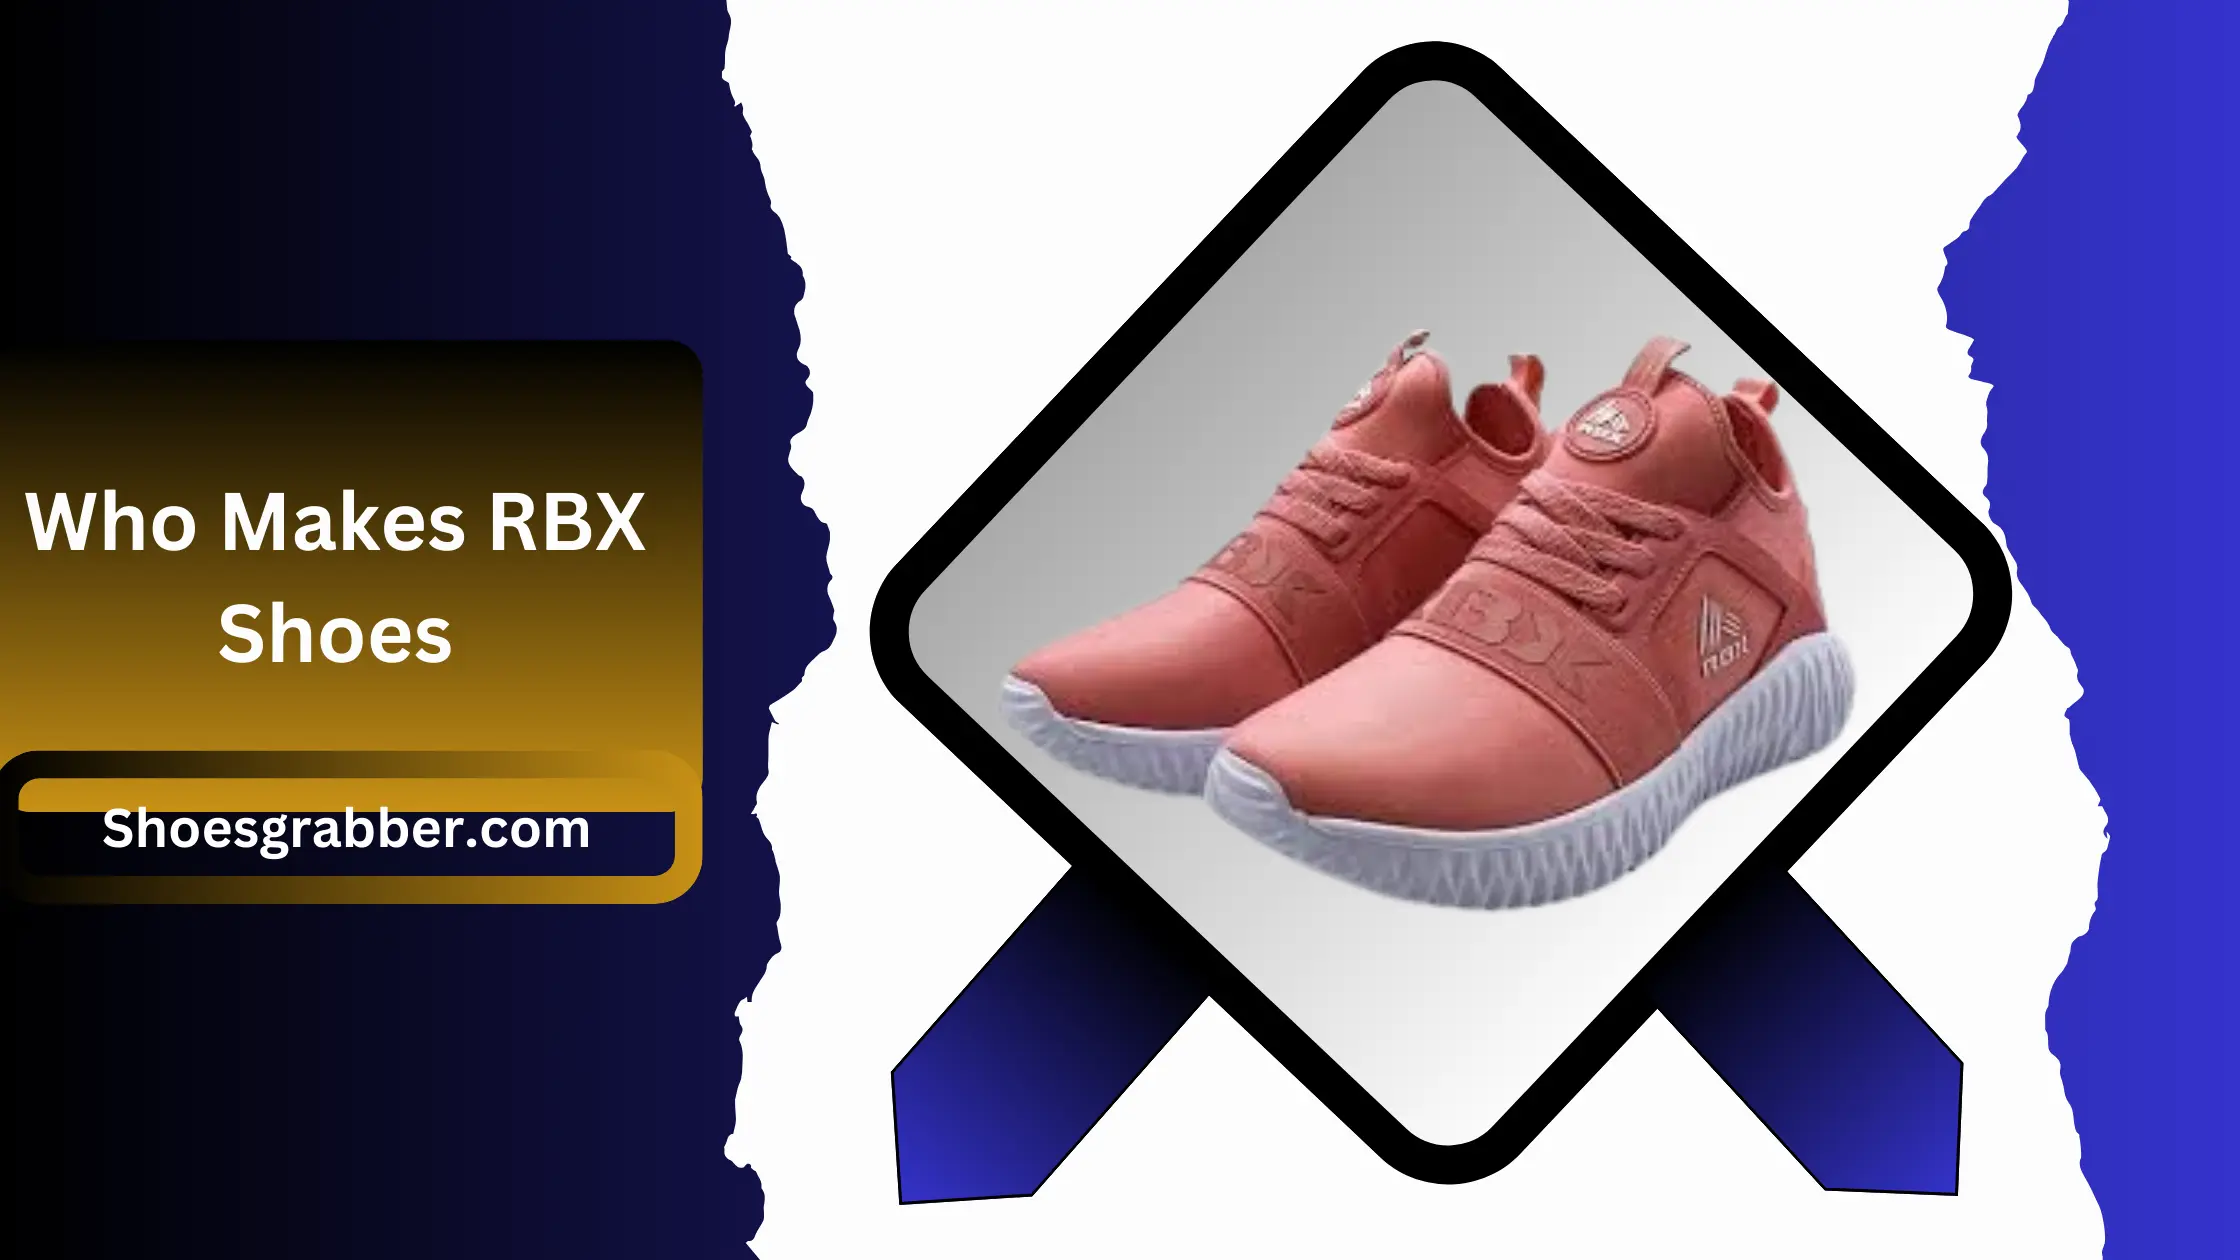 Who Makes RBX Shoes - A Definitive Guide